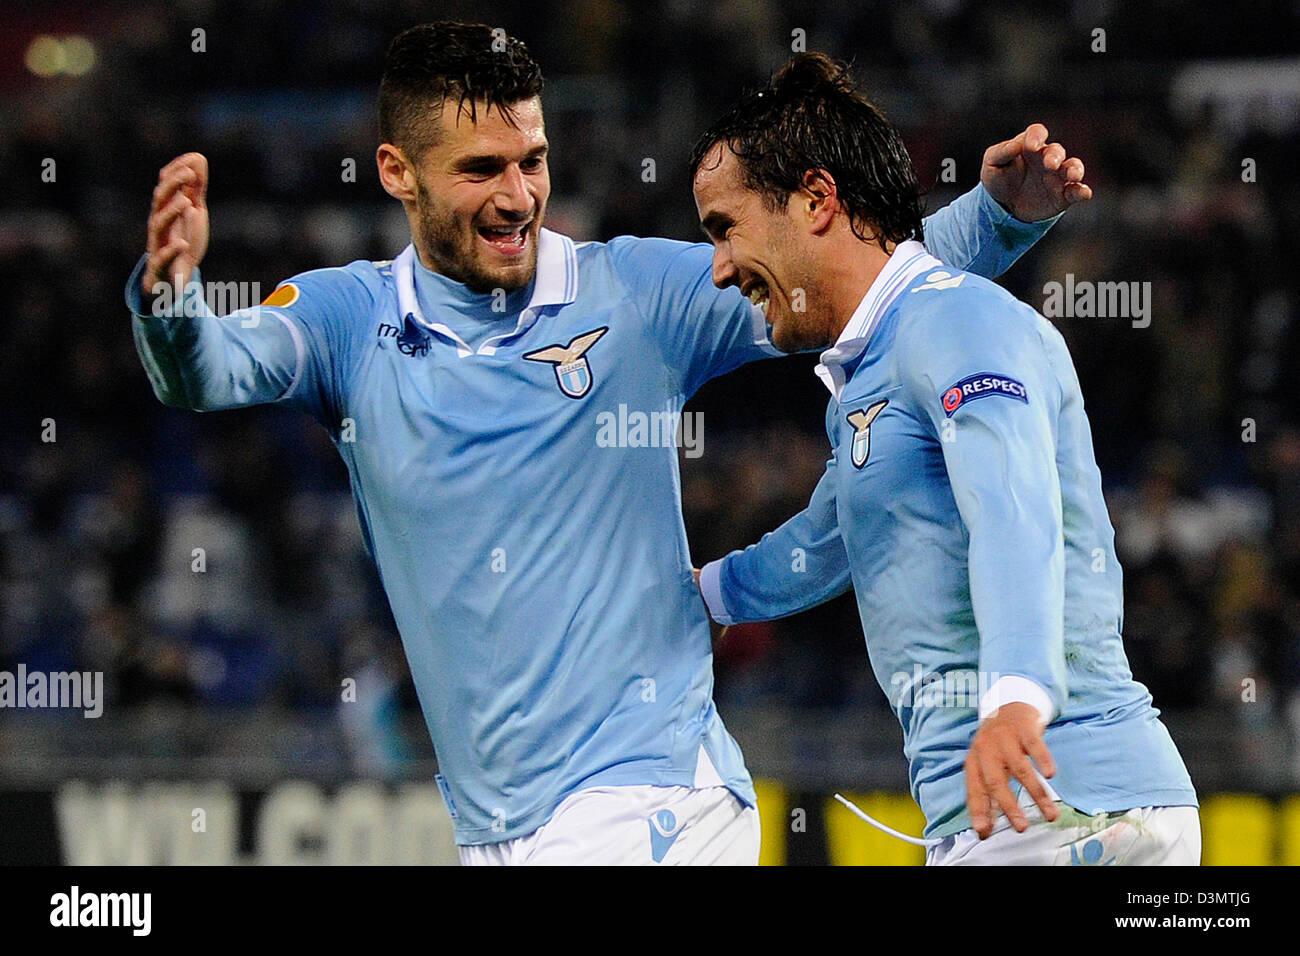 Rome, Italy. 21st February 2013. Lazio's Alvaro Gonzalez (R) celebrates with Lorik Cana after scoring the 2-0 during the UEFA Europa League Round of 32 second leg soccer match between Lazio Rome and Borussia Moenchengladbach at the Olympic Stadium in Rome, Italy, 21 February 2013. Photo: Marius Becker/dpa /Alamy Live News+++(c) dpa /Alamy Live News- Bildfunk+++ Stock Photo